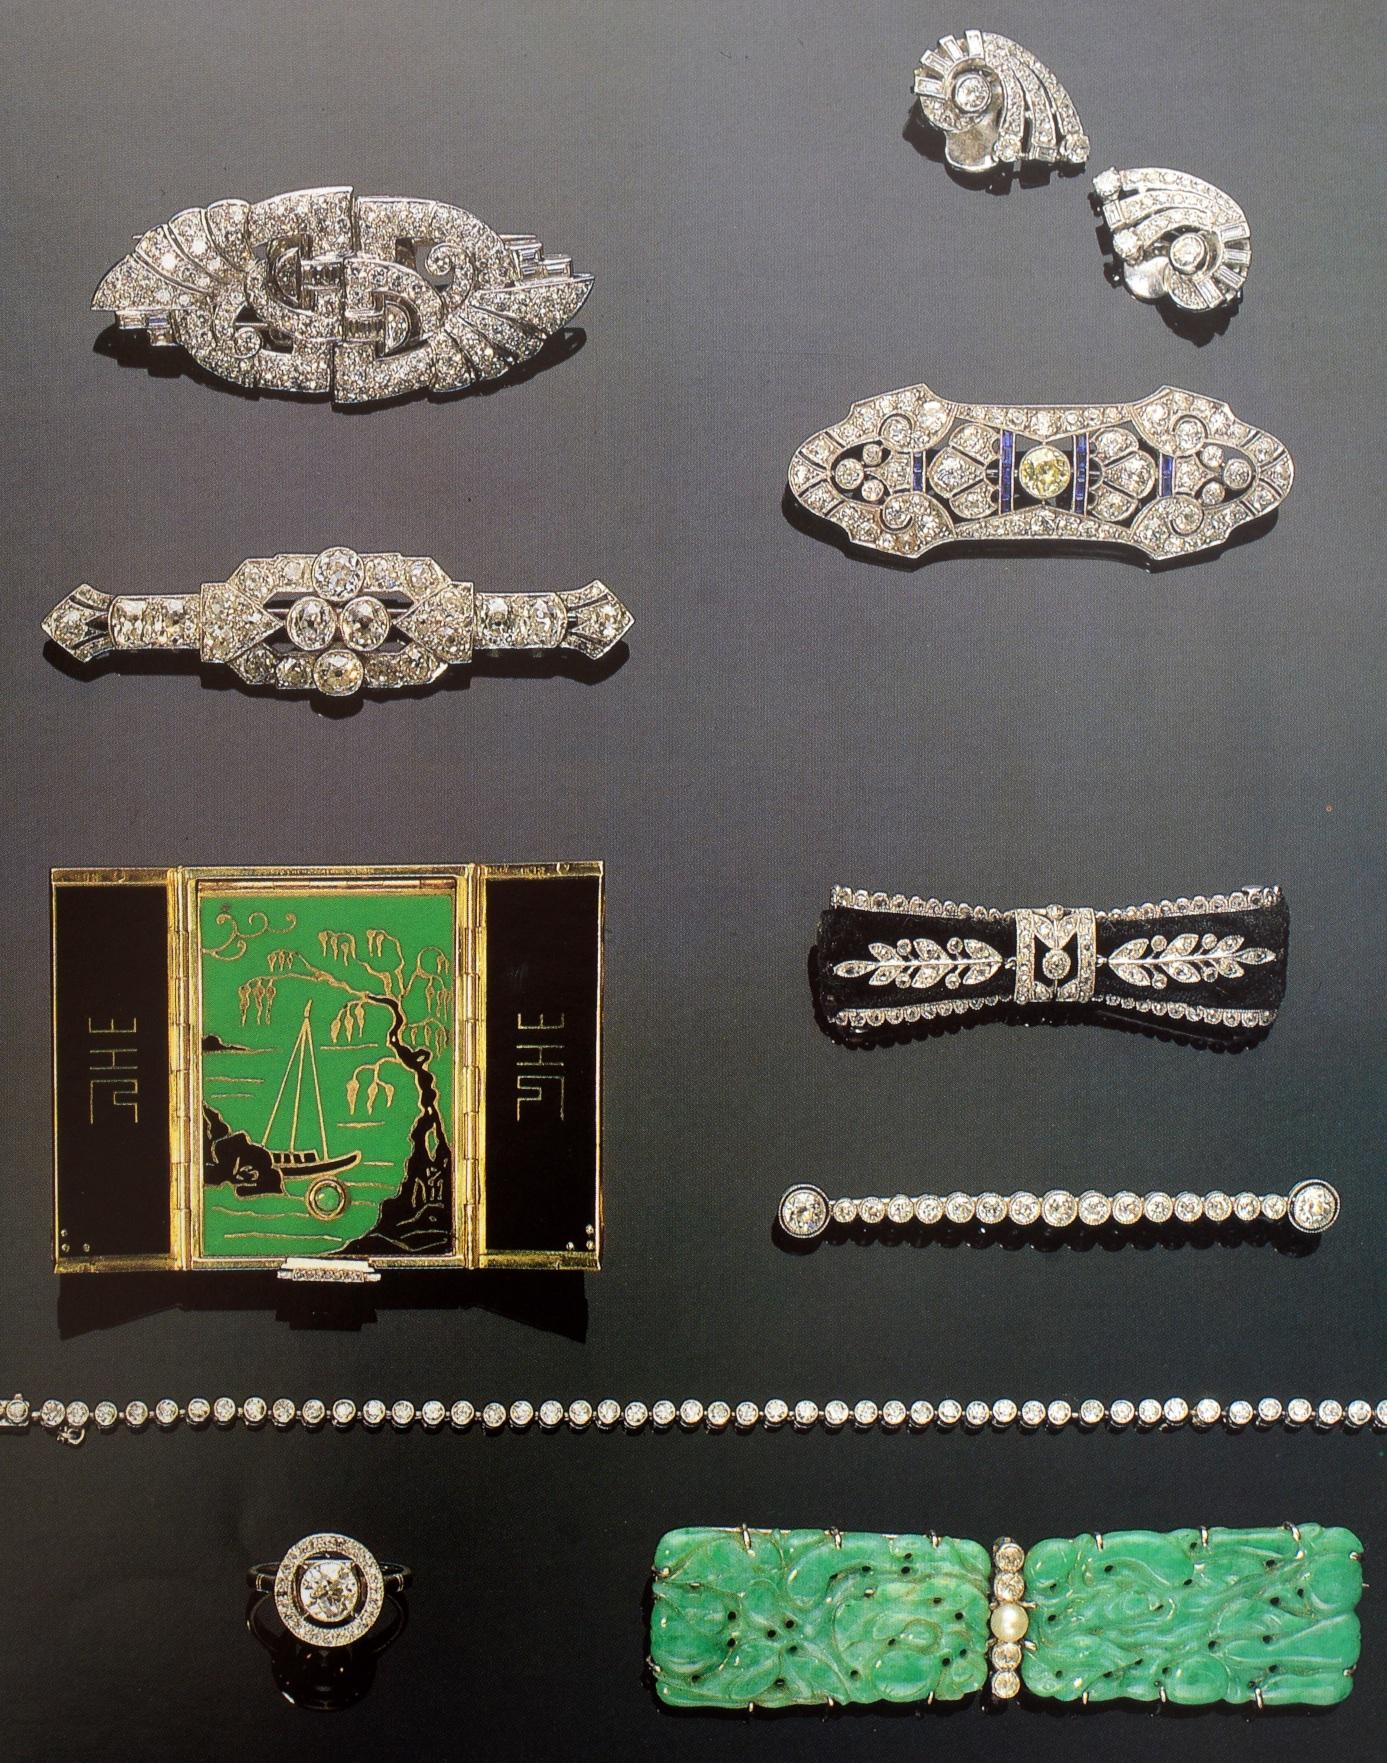 Paper Set of 4 Jewelry Catalogues from Sotheby's & Christie's, First Edition